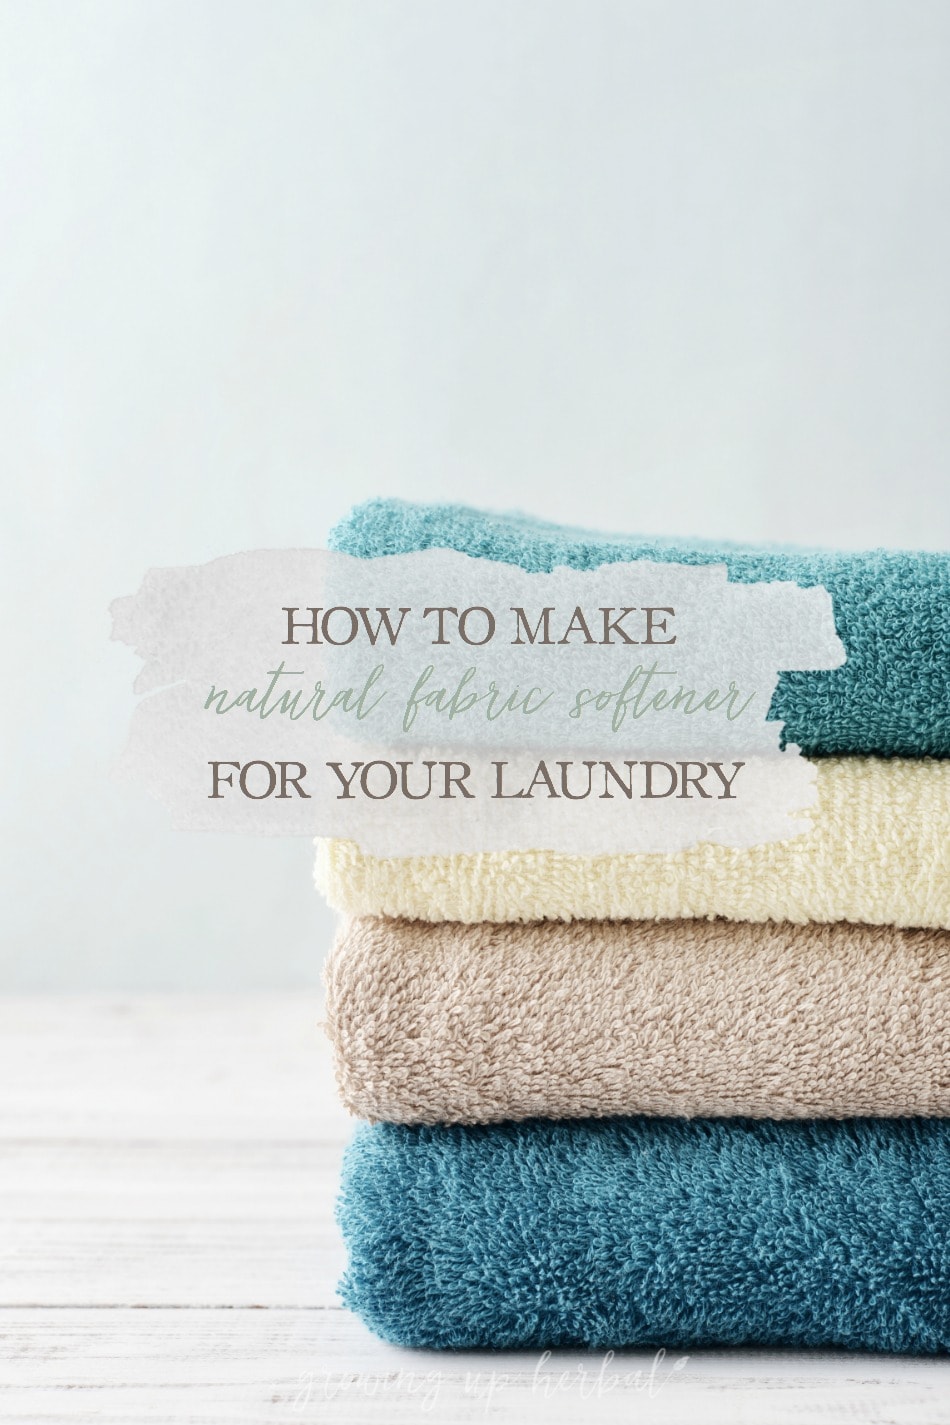 How To Make Natural Fabric Softener For Your Laundry | Growing Up Herbal | Cut out some harmful toxins by making your own homemade fabric softener!